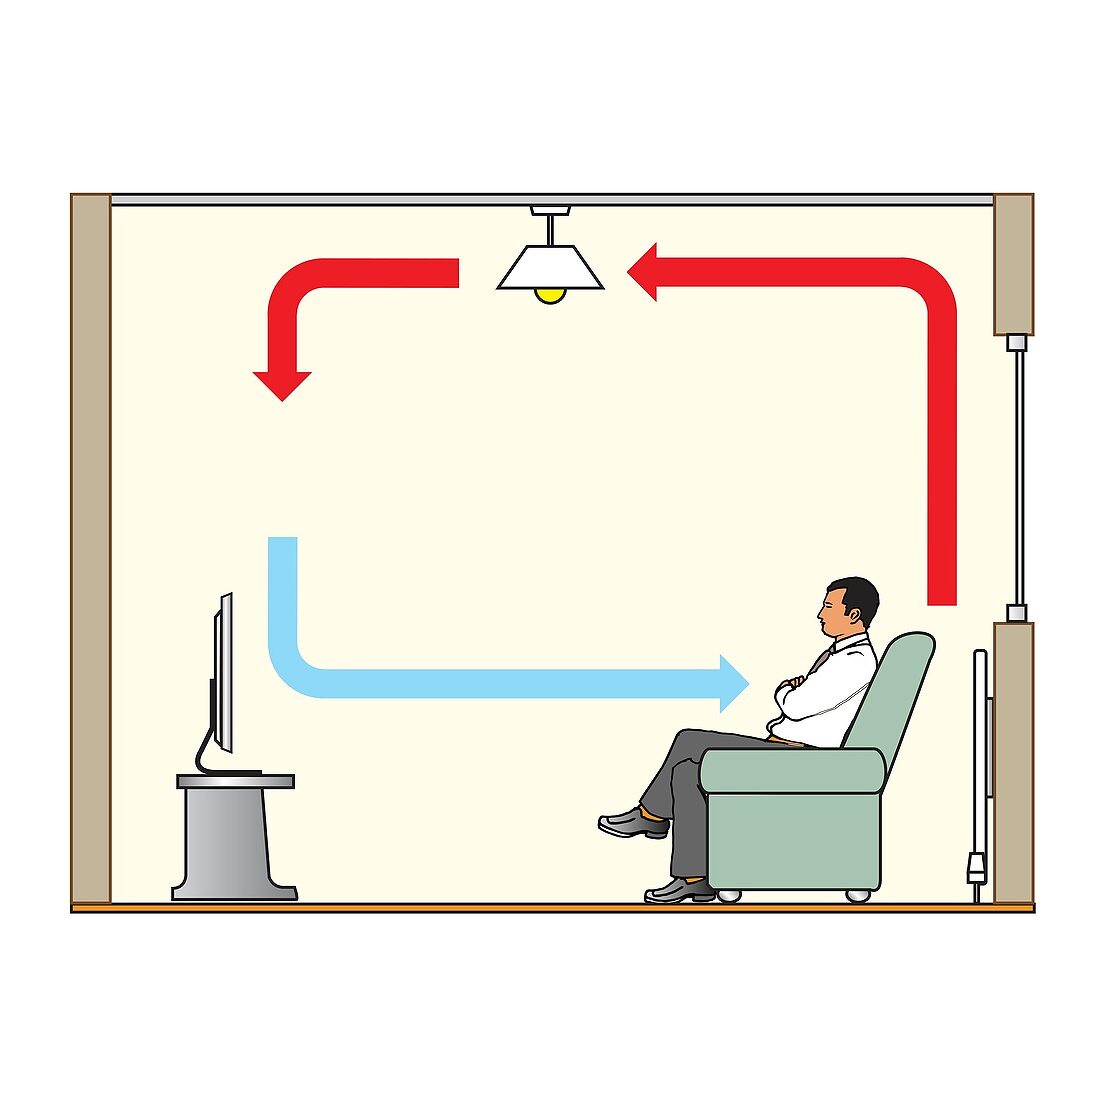 Convection current round a room, illustration